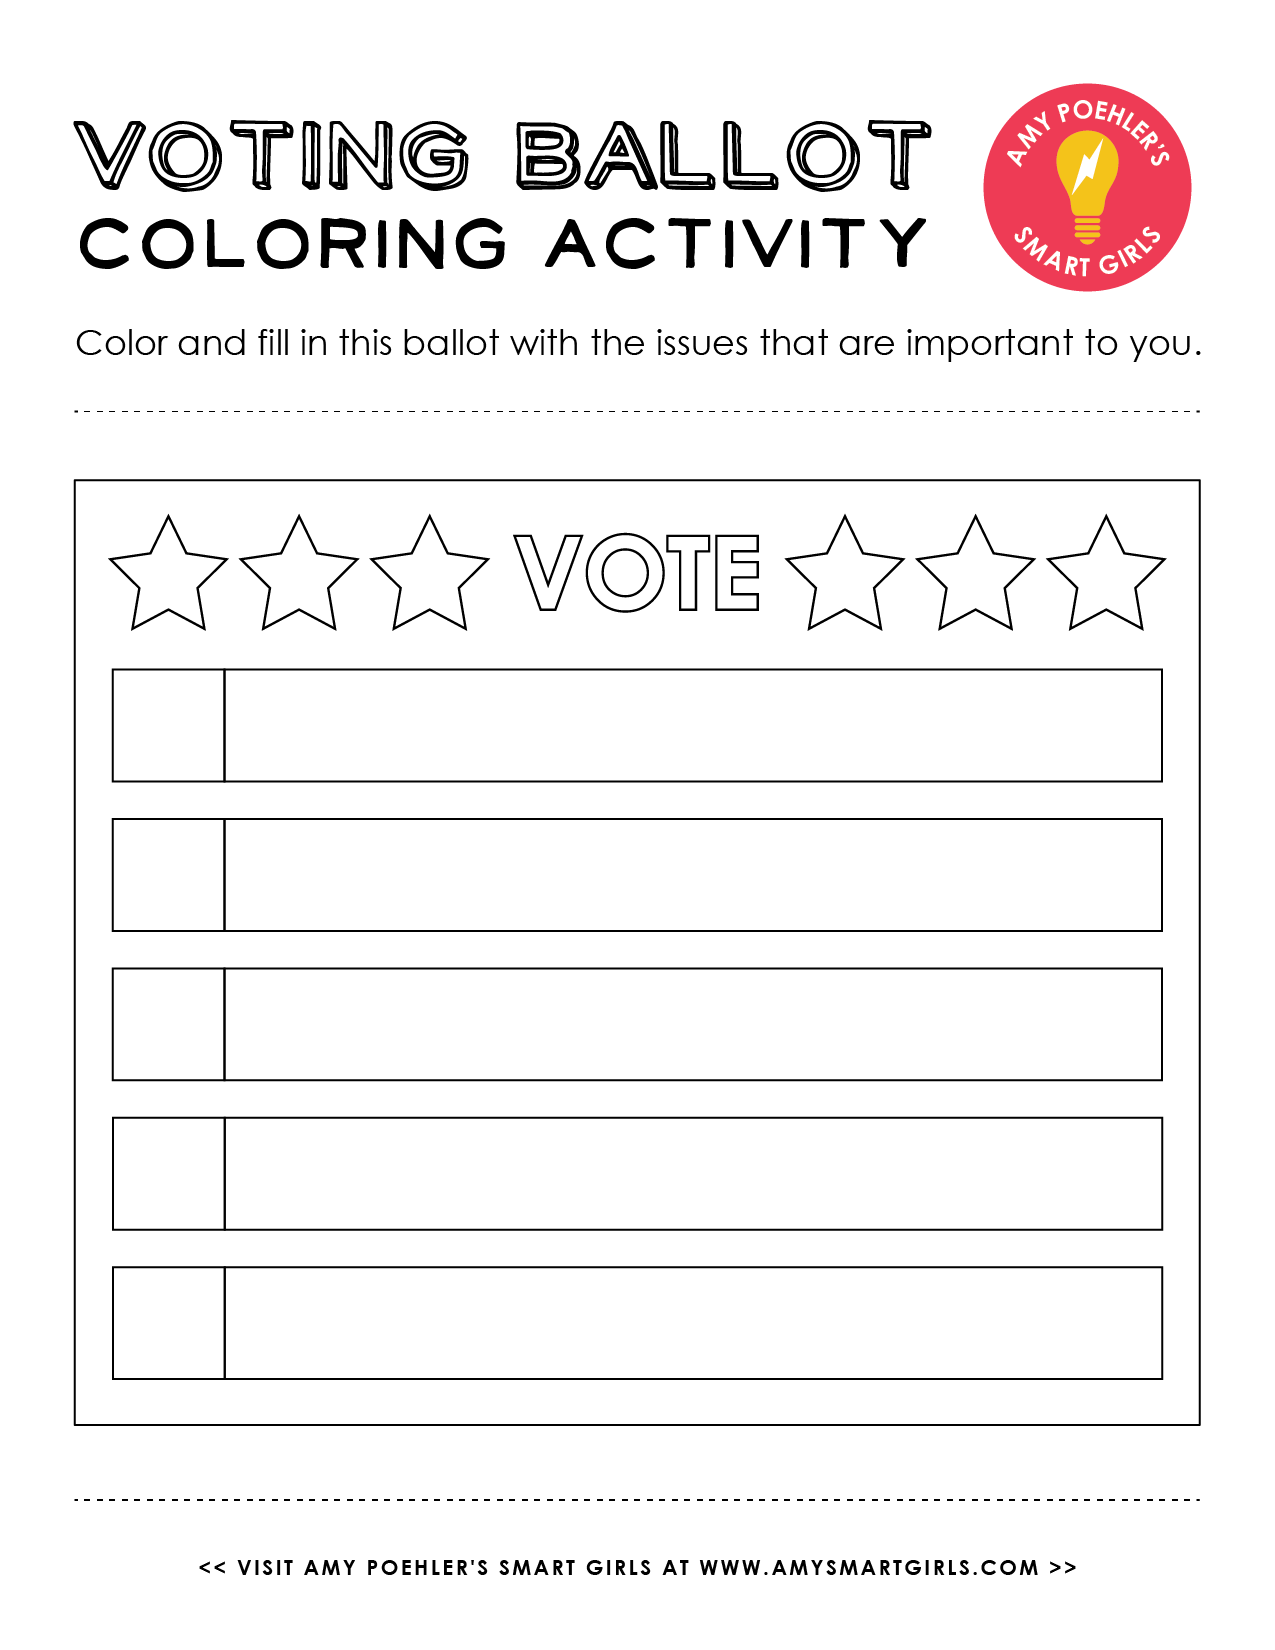 voting-ballot-coloring-activity-amy-poehler-s-smart-girls